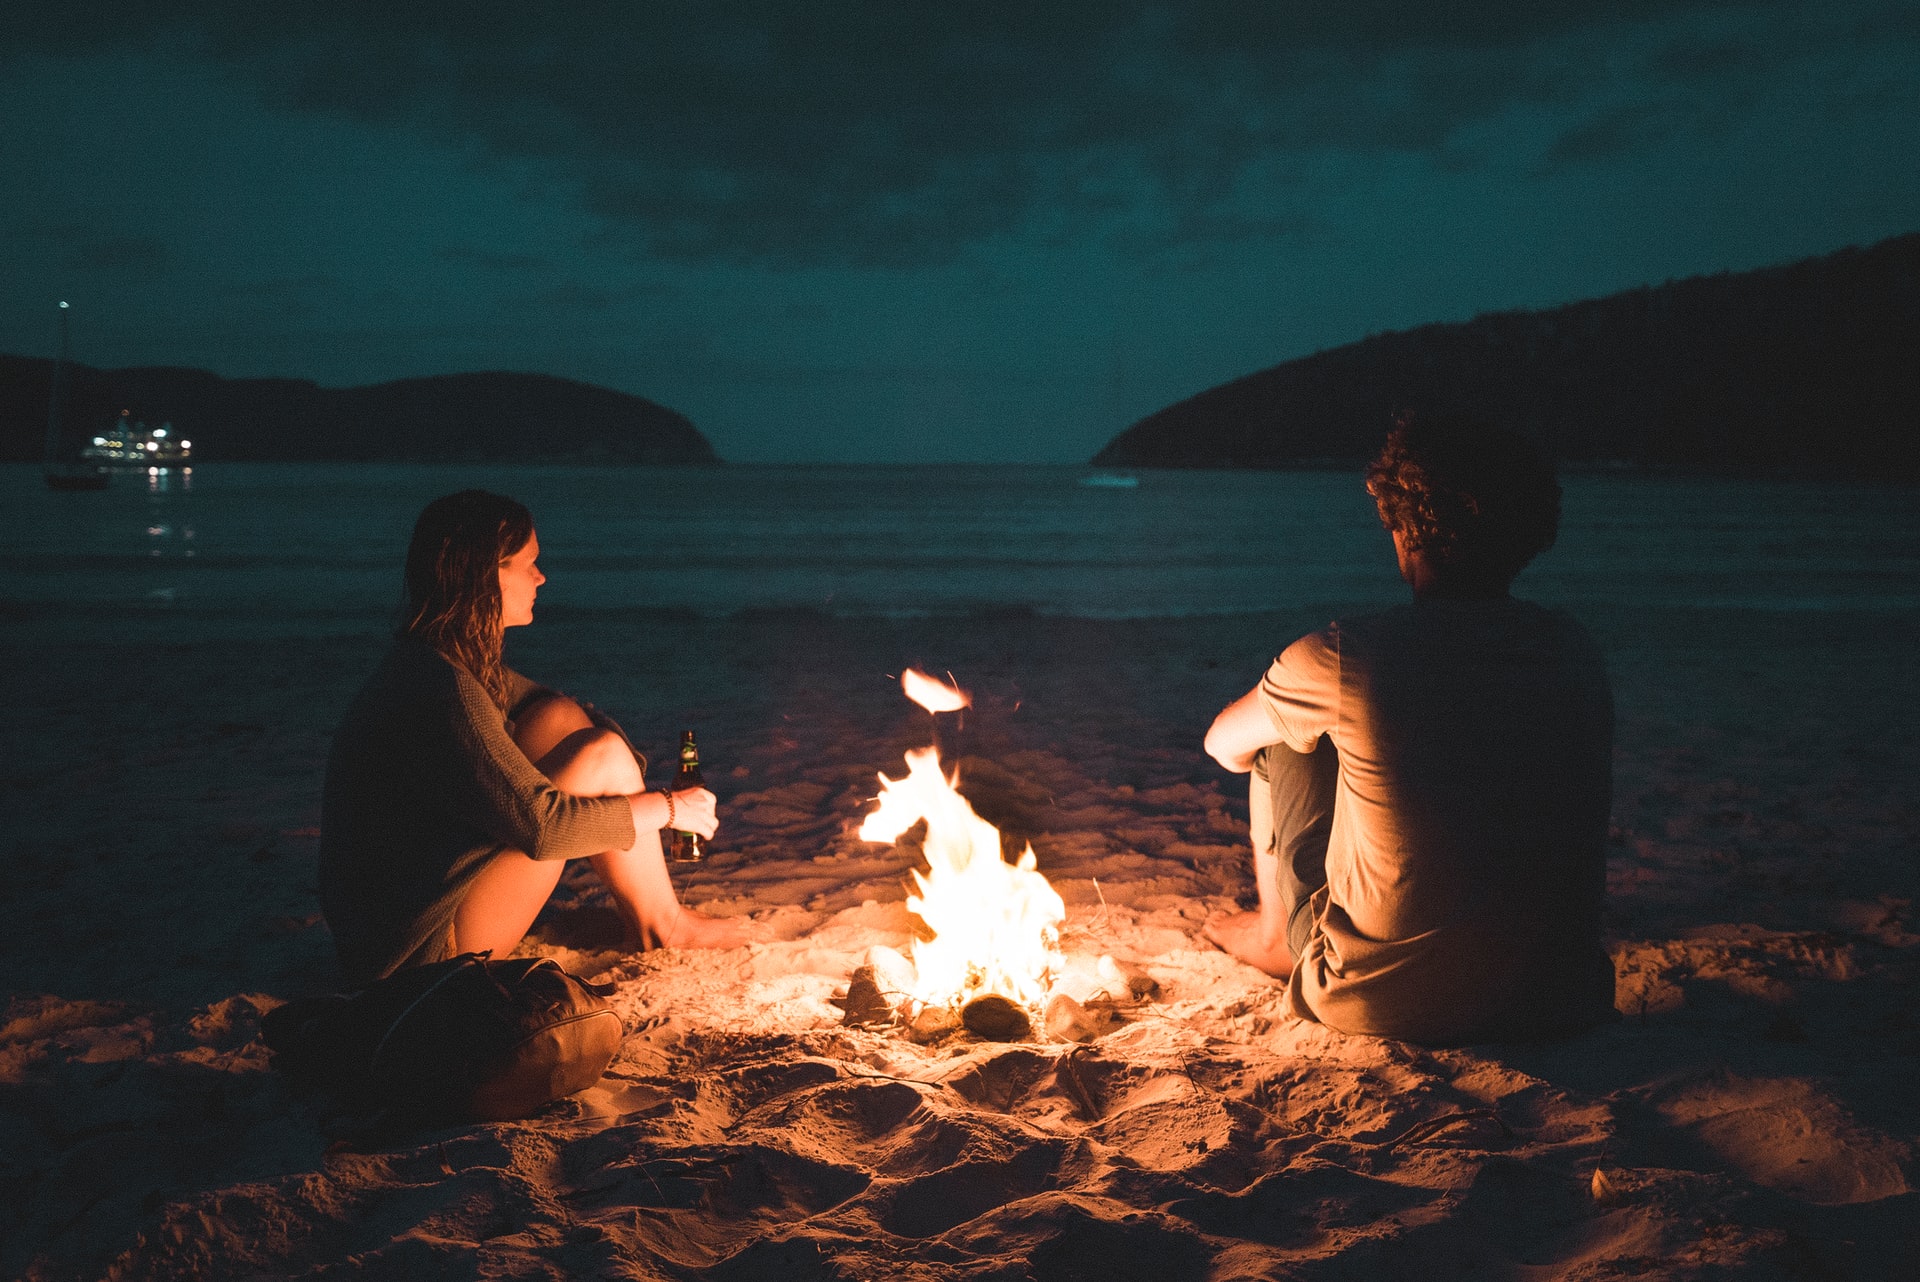 Stargazing next to a campfire is one of the things we used to enjoy before social media.